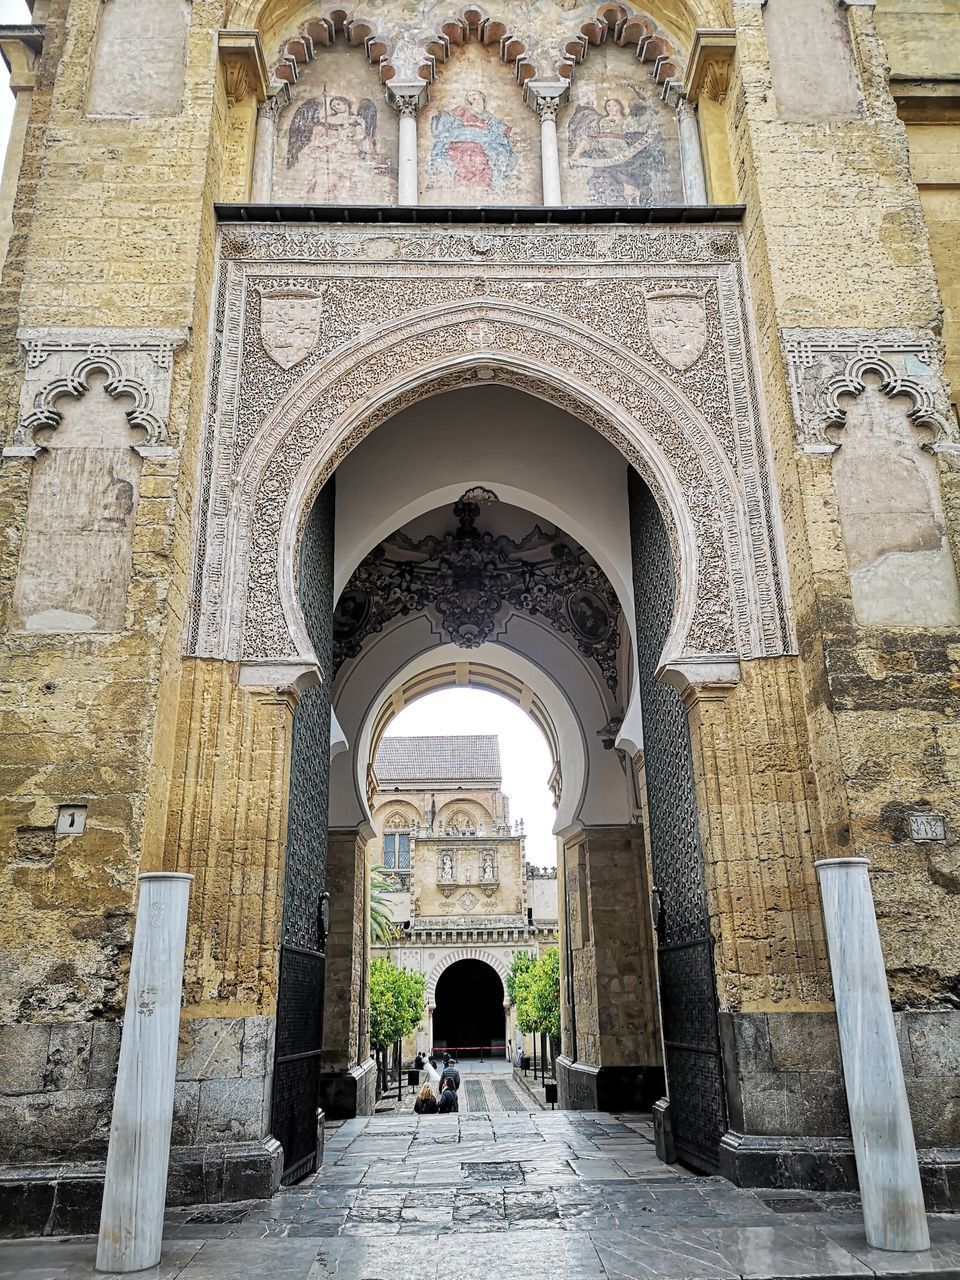 ARCHWAY OF HISTORICAL BUILDING